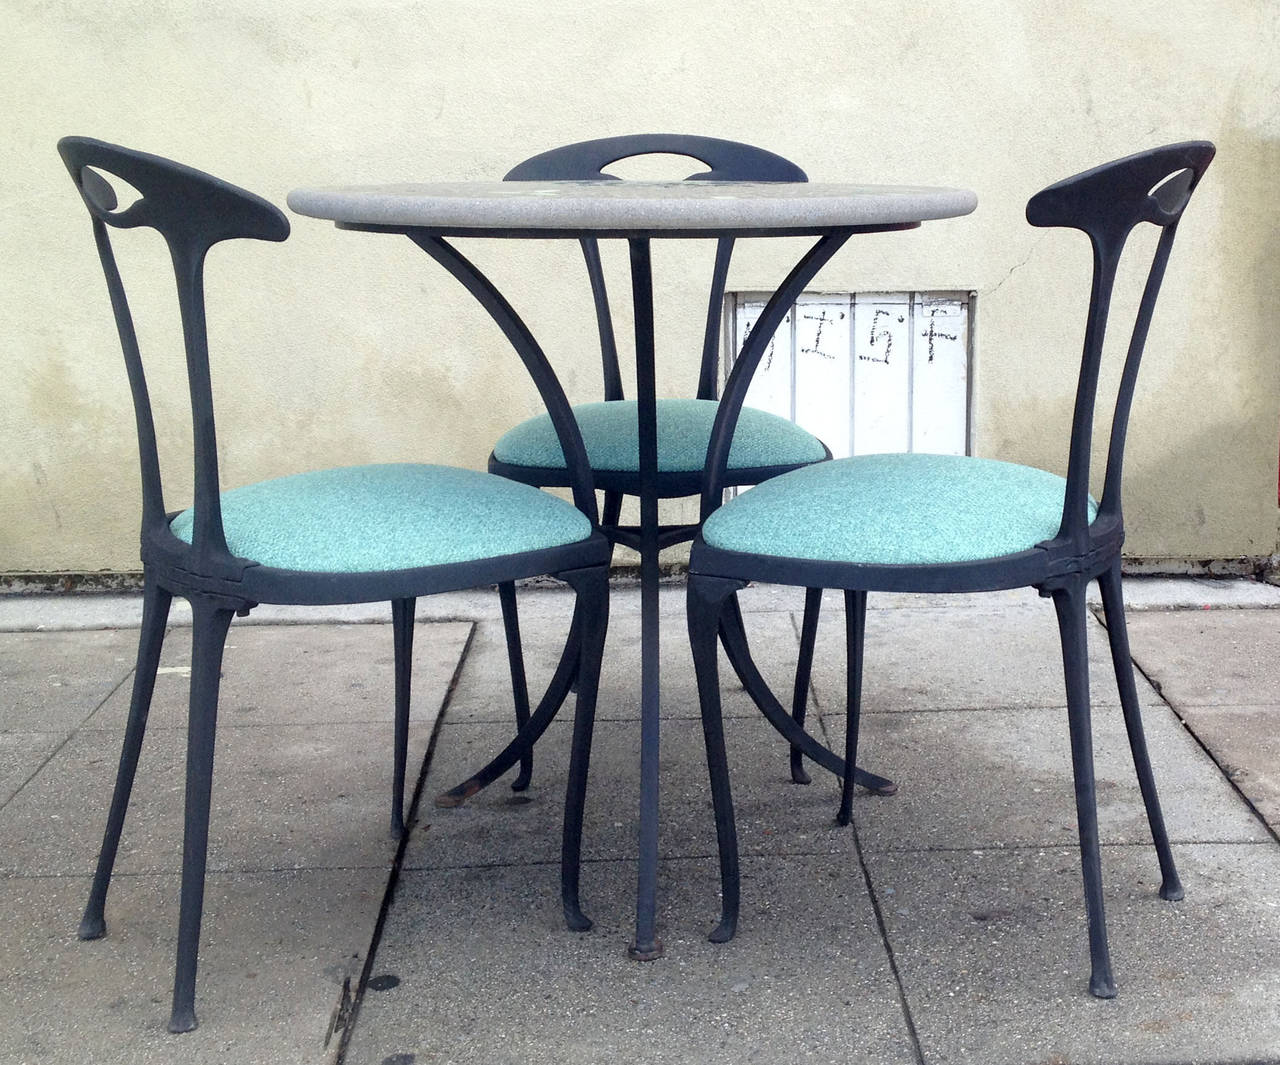 This patio set features three chairs and a petite mosaic top table. They are made of cast iron. The circular mosaic table top is supported by a three-legged iron base with an elegant shape. 
Table measures 29